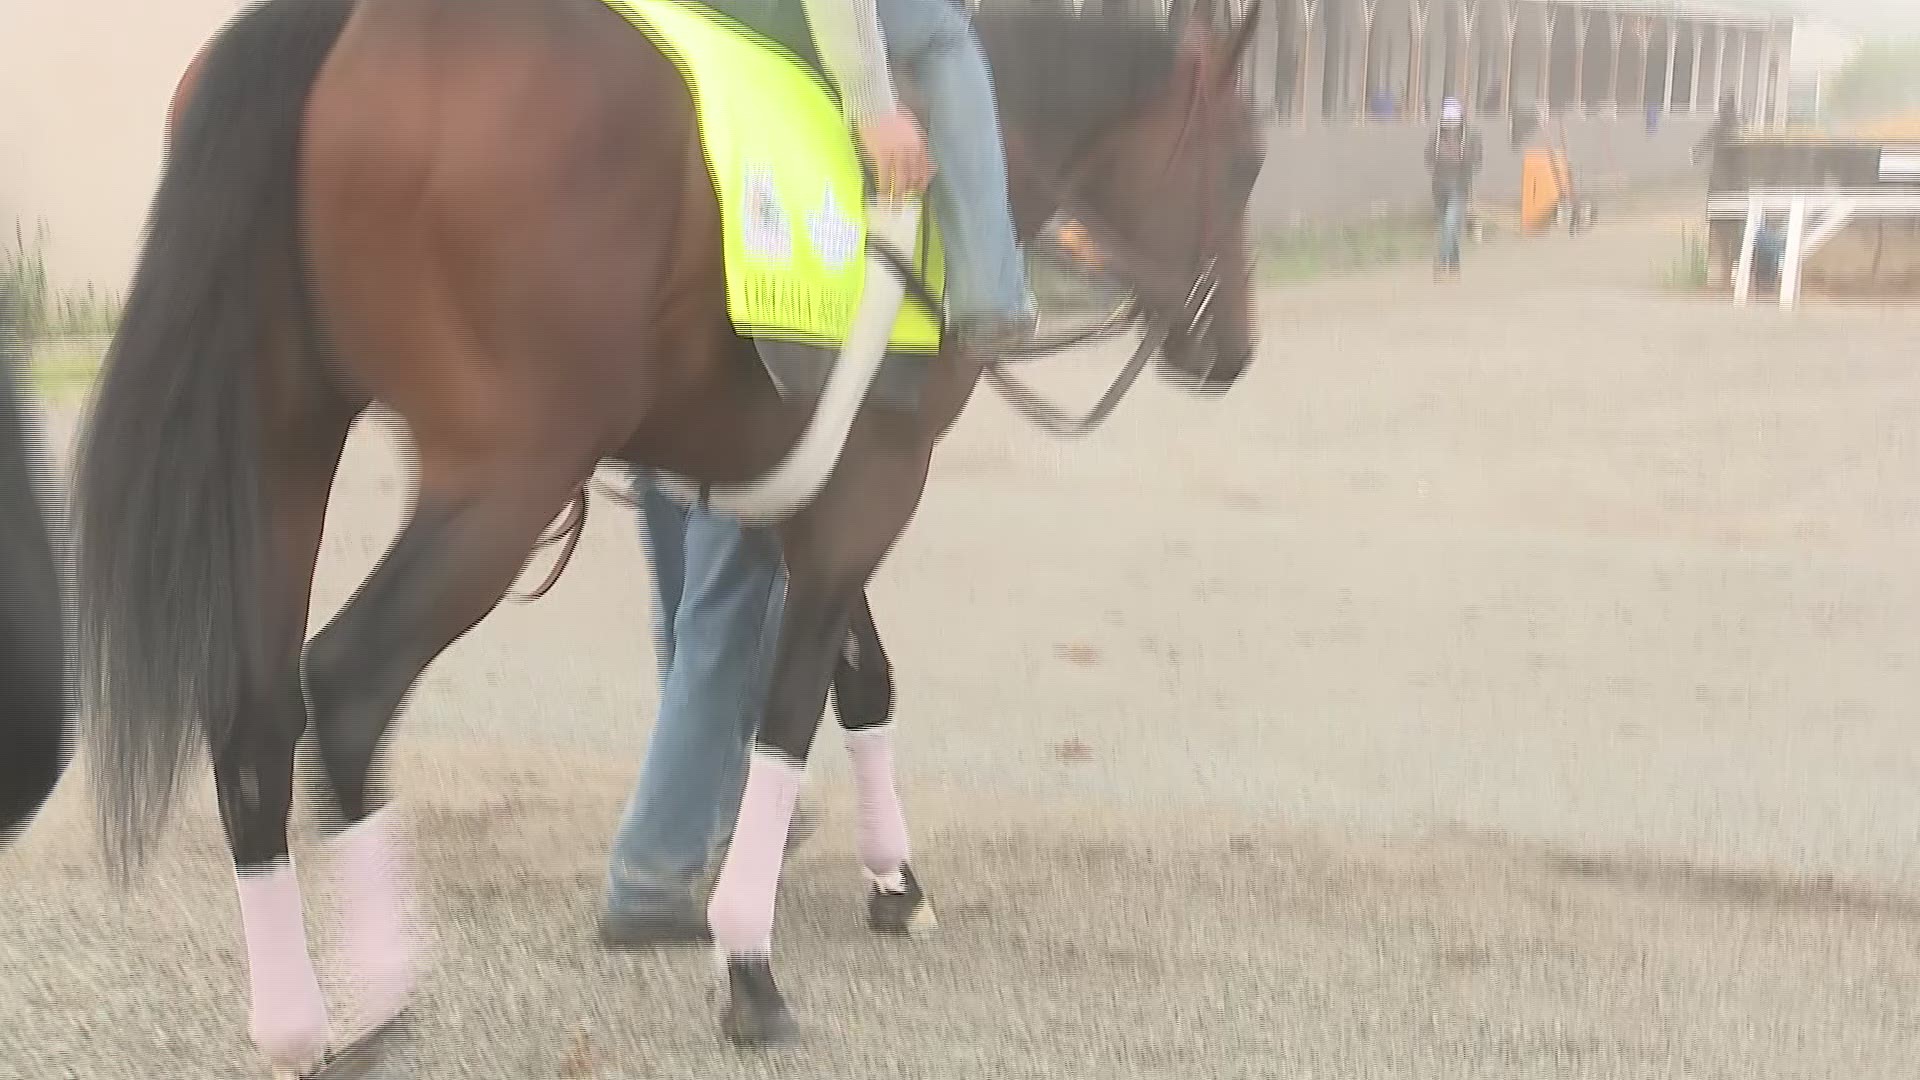 The Arkansas Derby works at Churchill Downs ahead of the Kentucky Derby